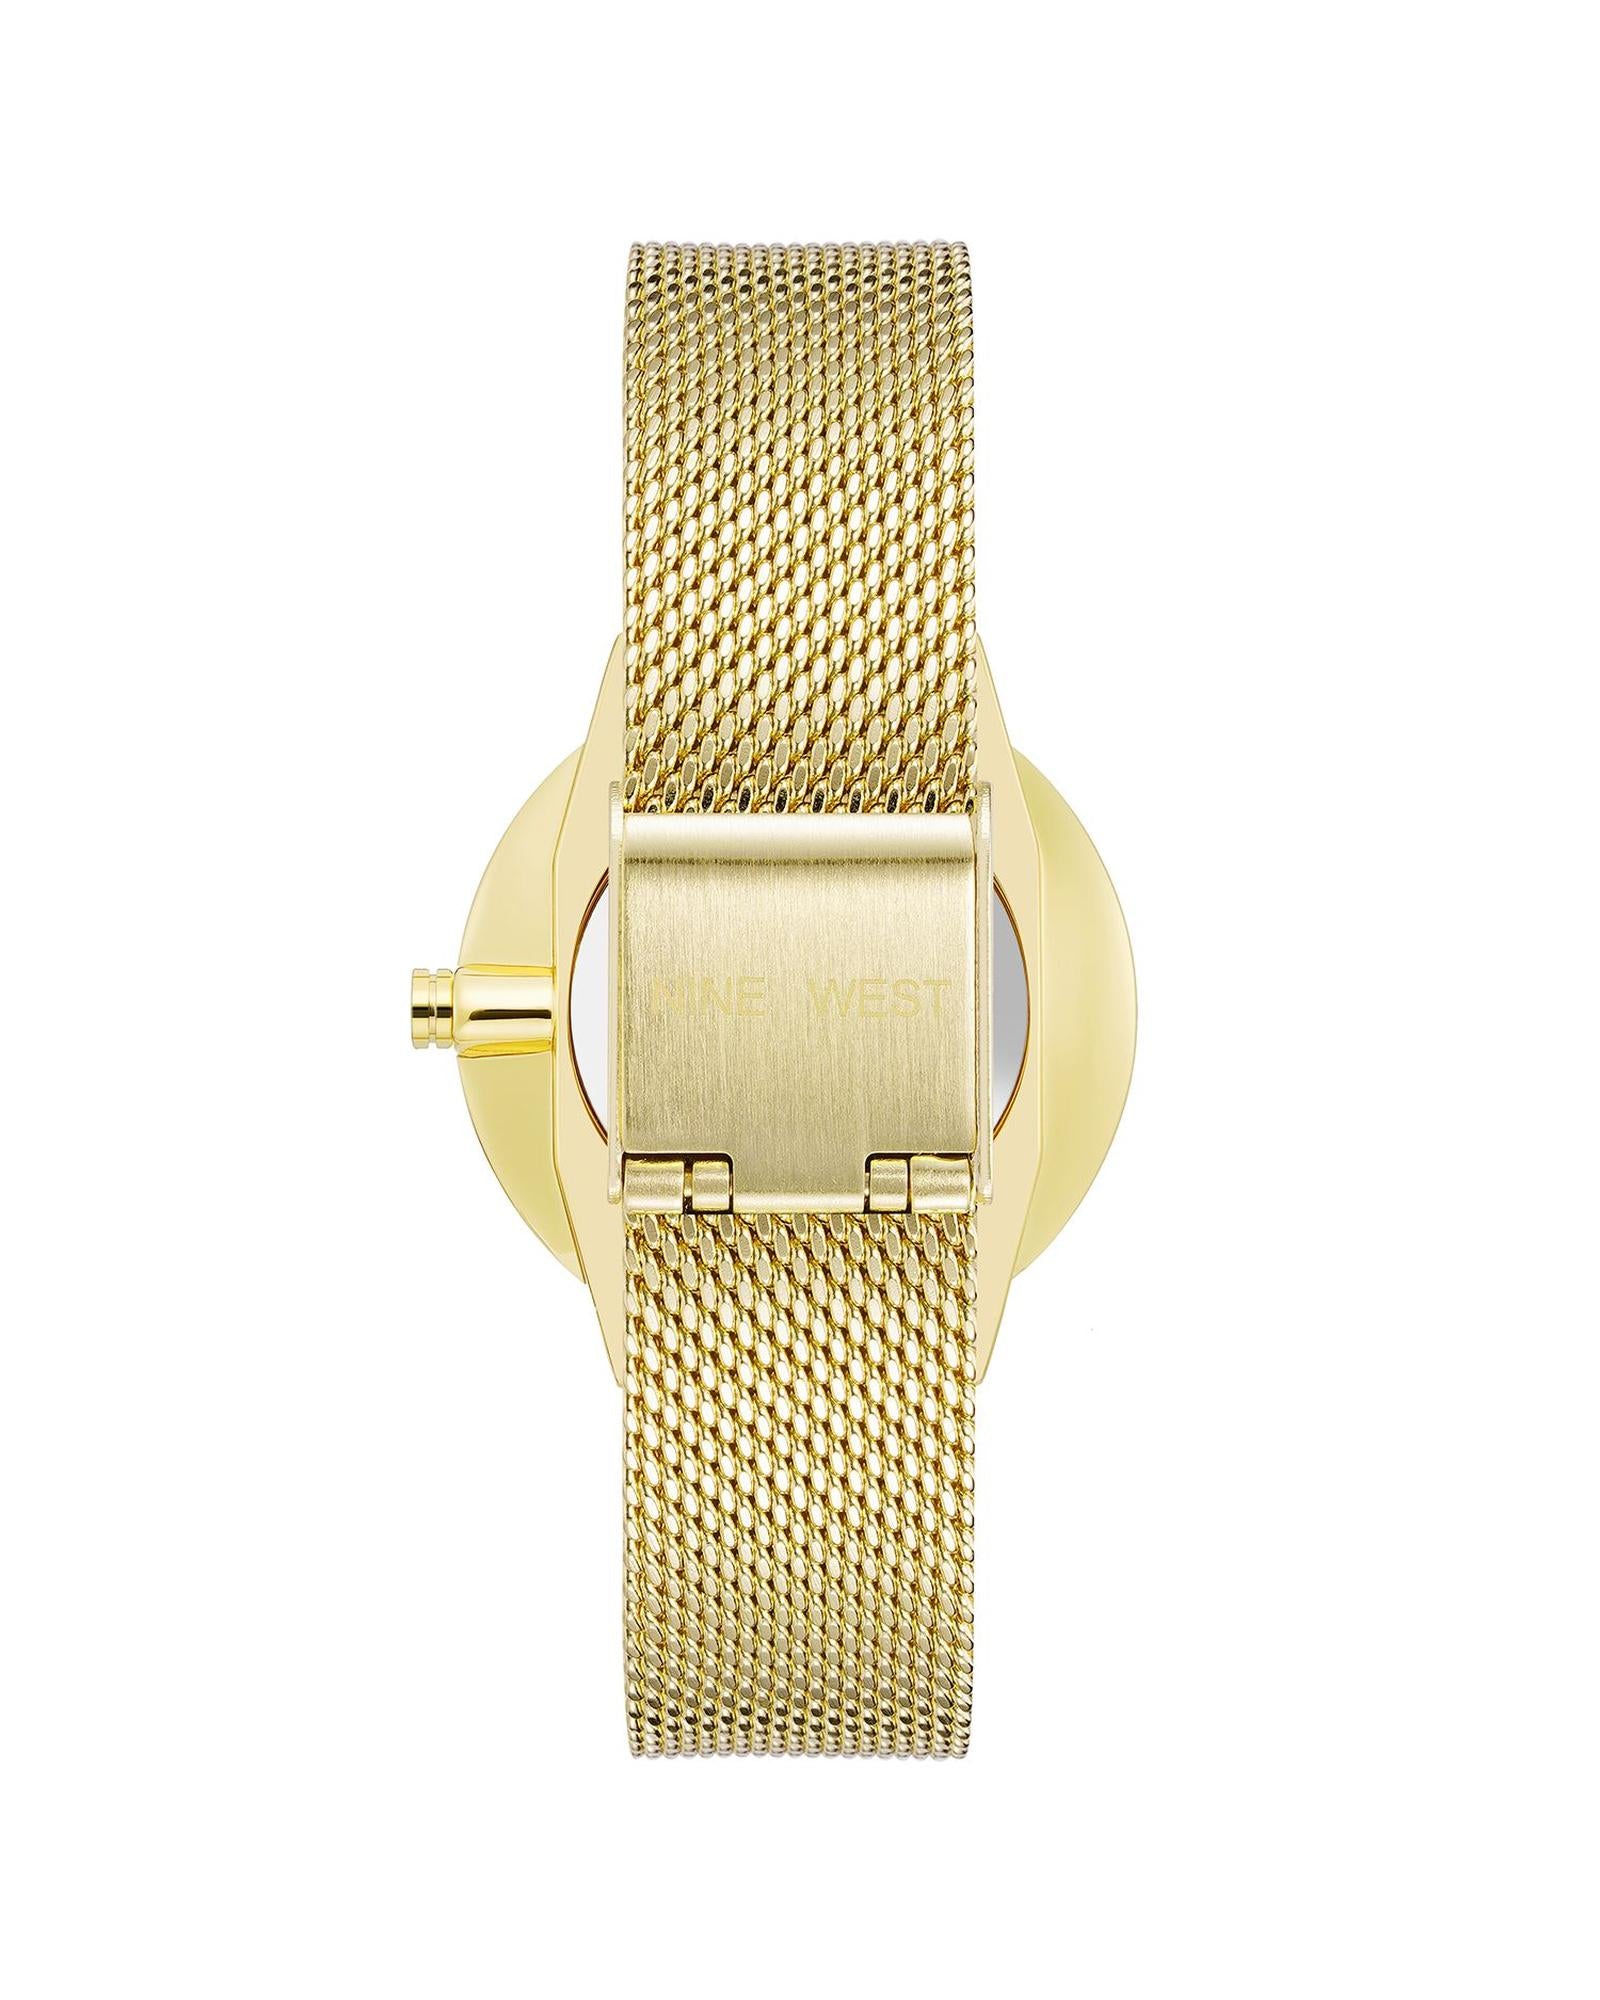 Gold Bangle Quartz Watch with Stainless Steel Mesh Wristband One Size Women